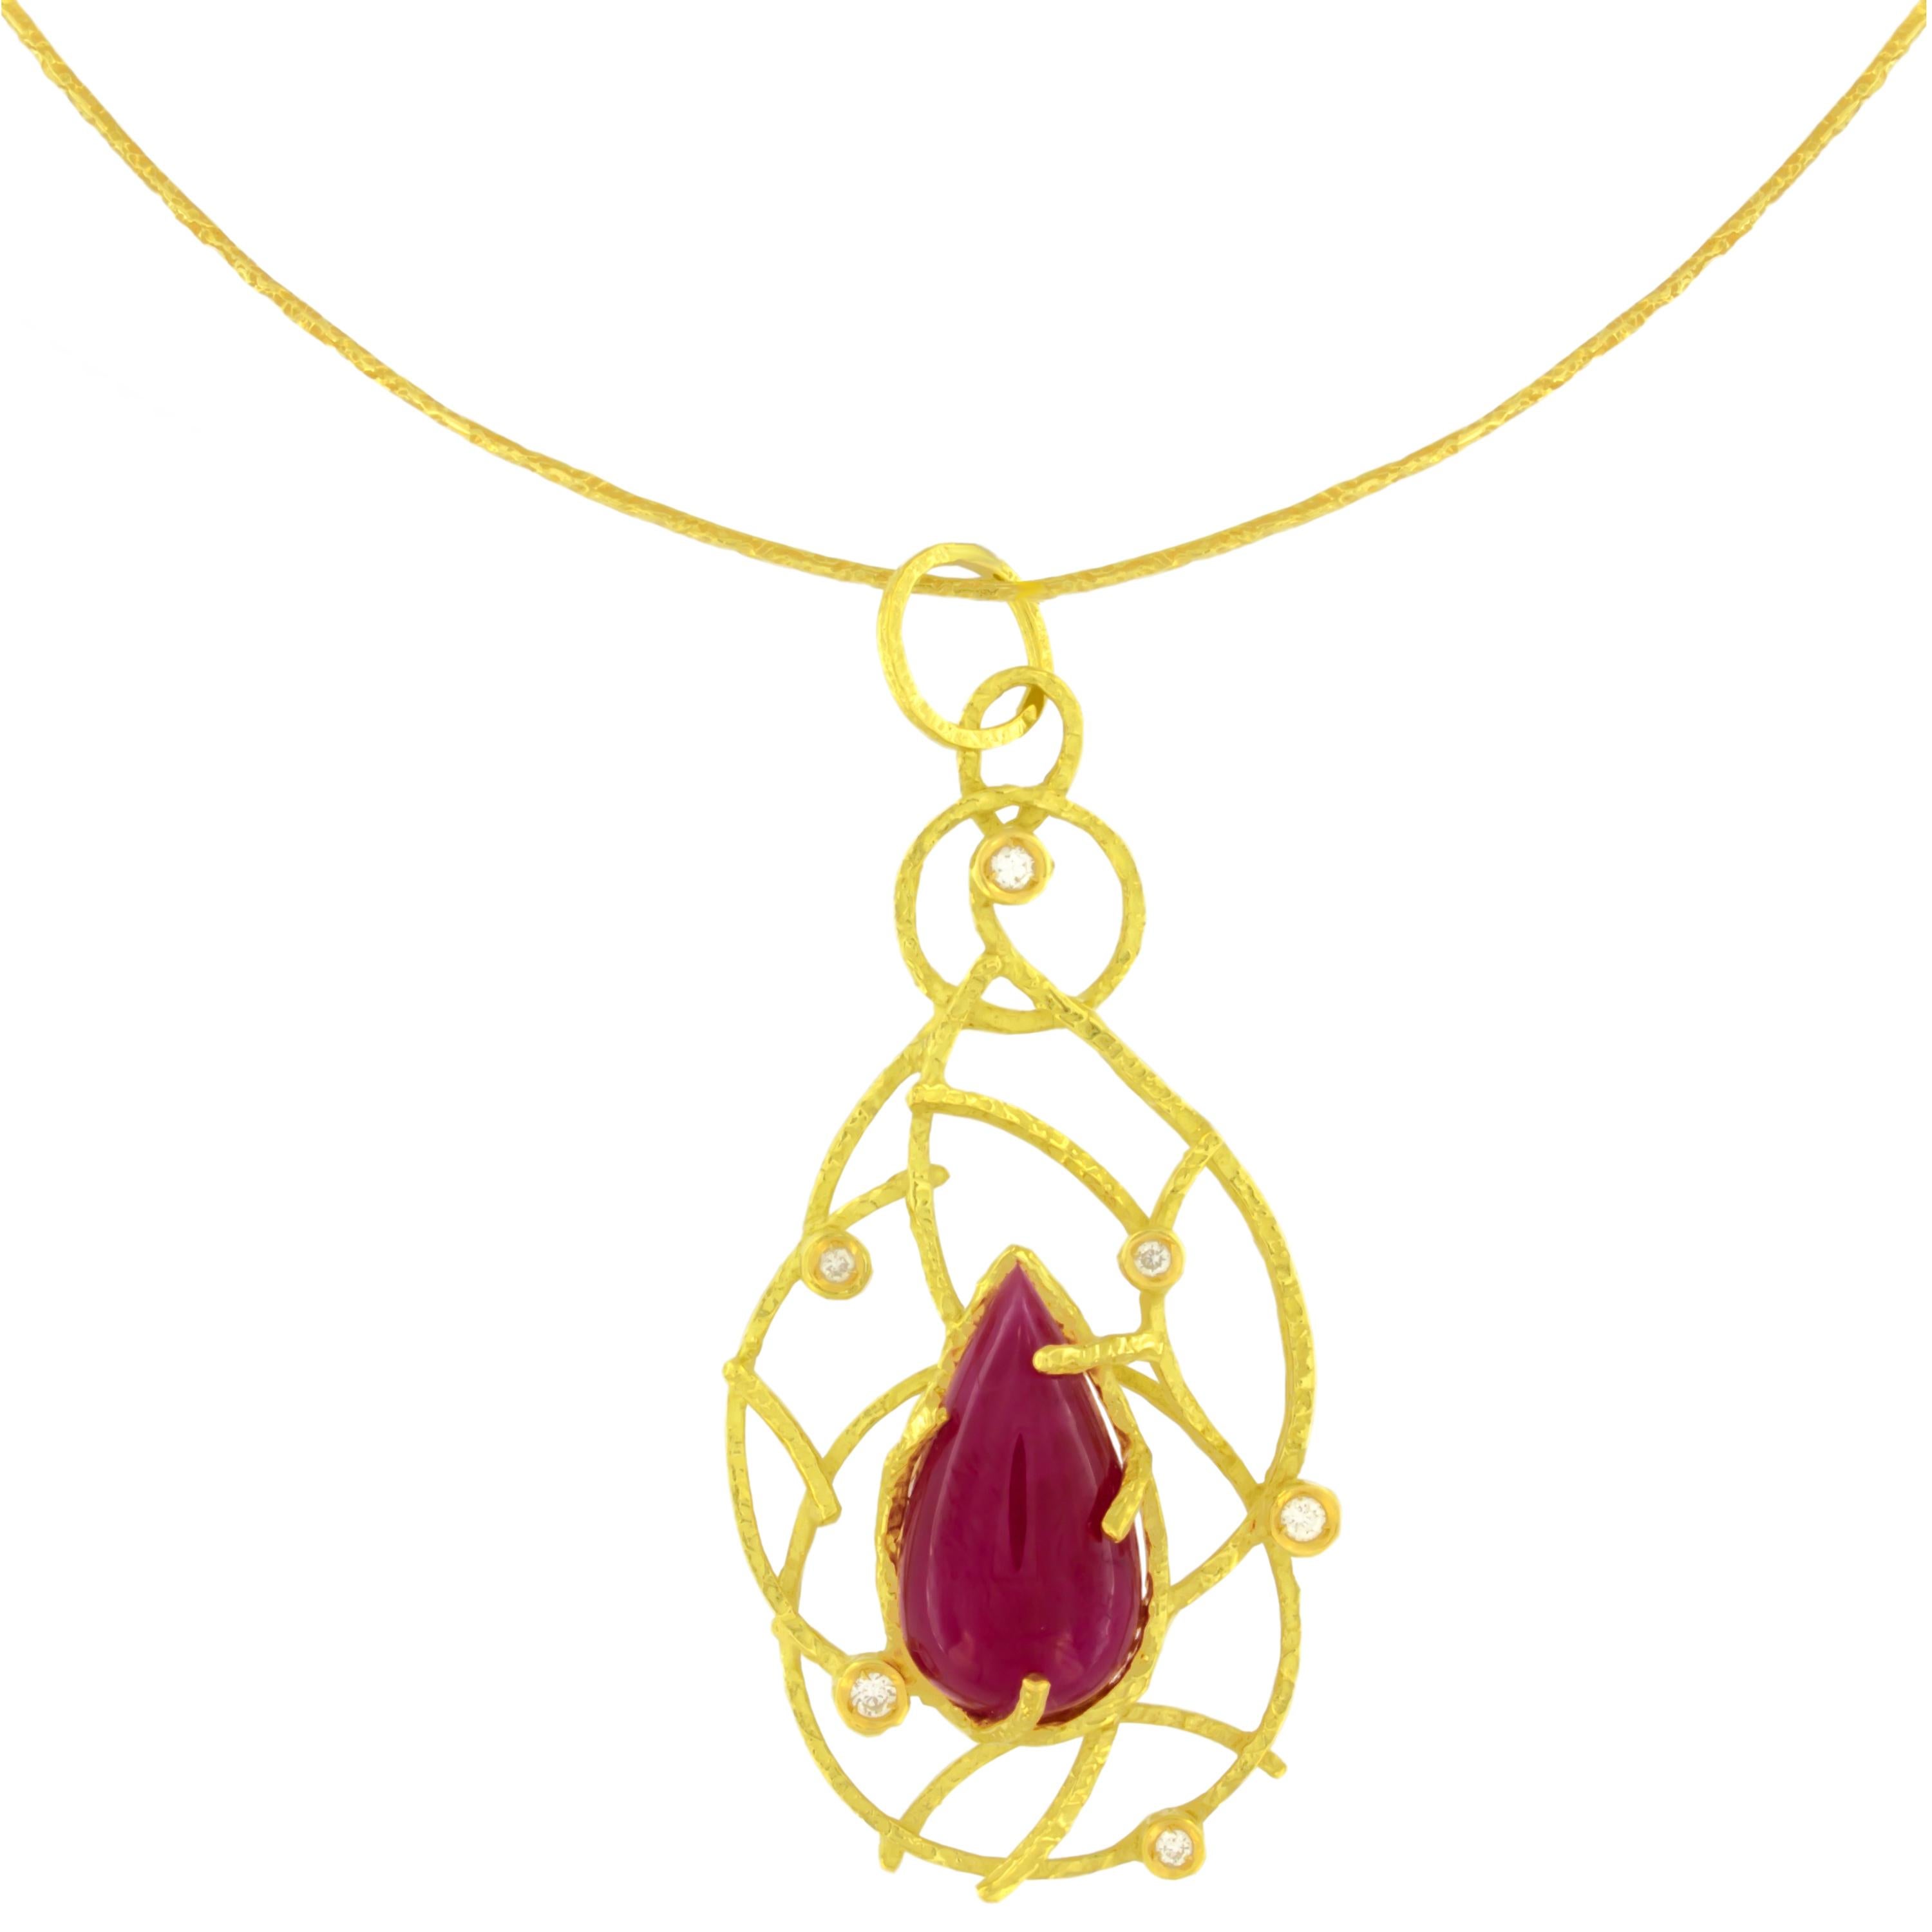 Lovely Ruby and Diamonds 18 Karat Yellow Gold Pendant Necklace, from Sacchi’s 